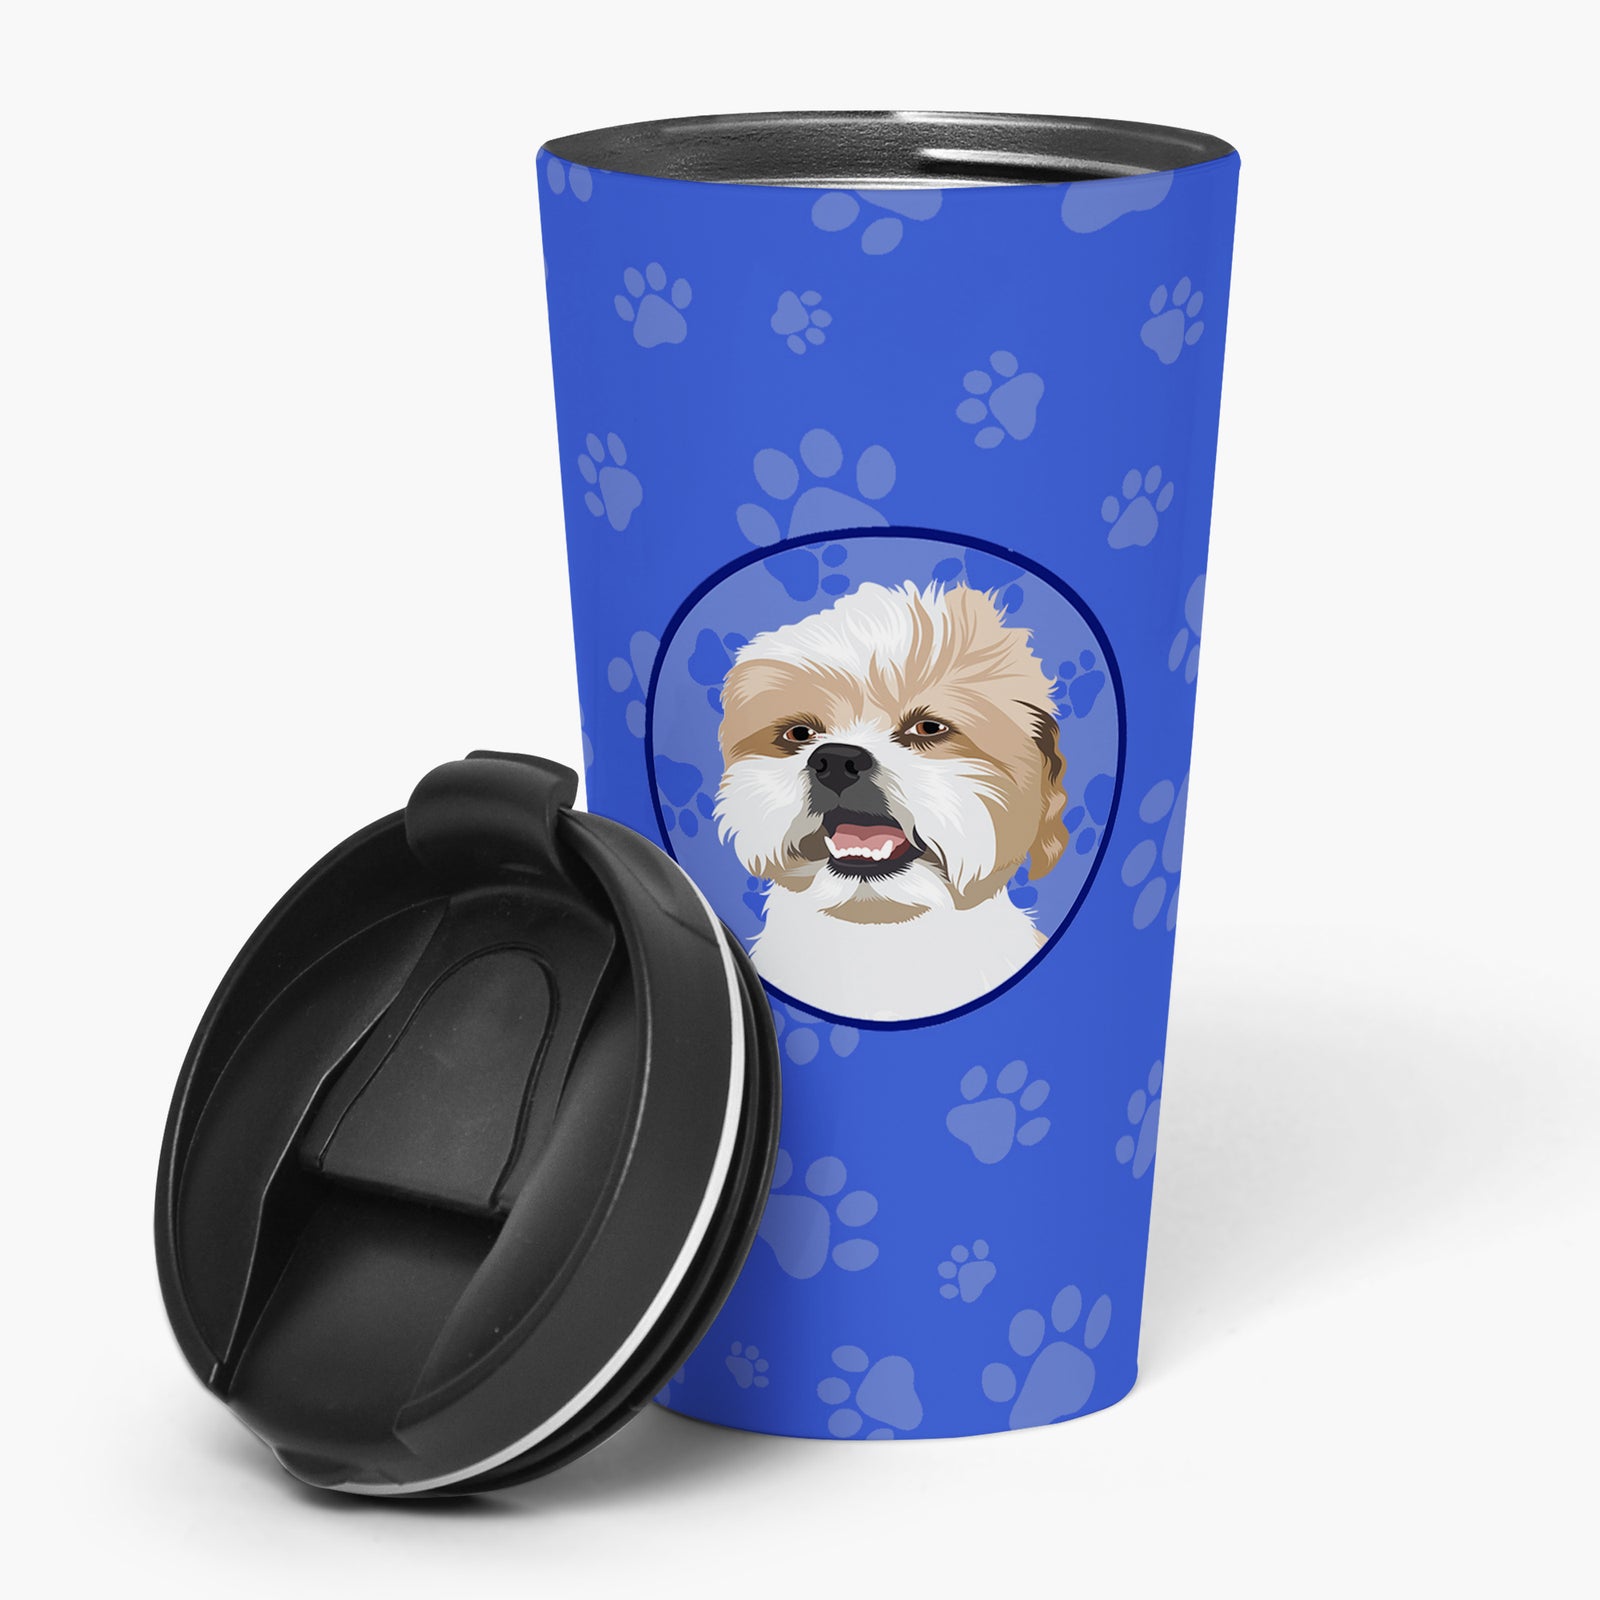 Buy this Shih-Tzu Silver Gold and White  Stainless Steel 16 oz  Tumbler